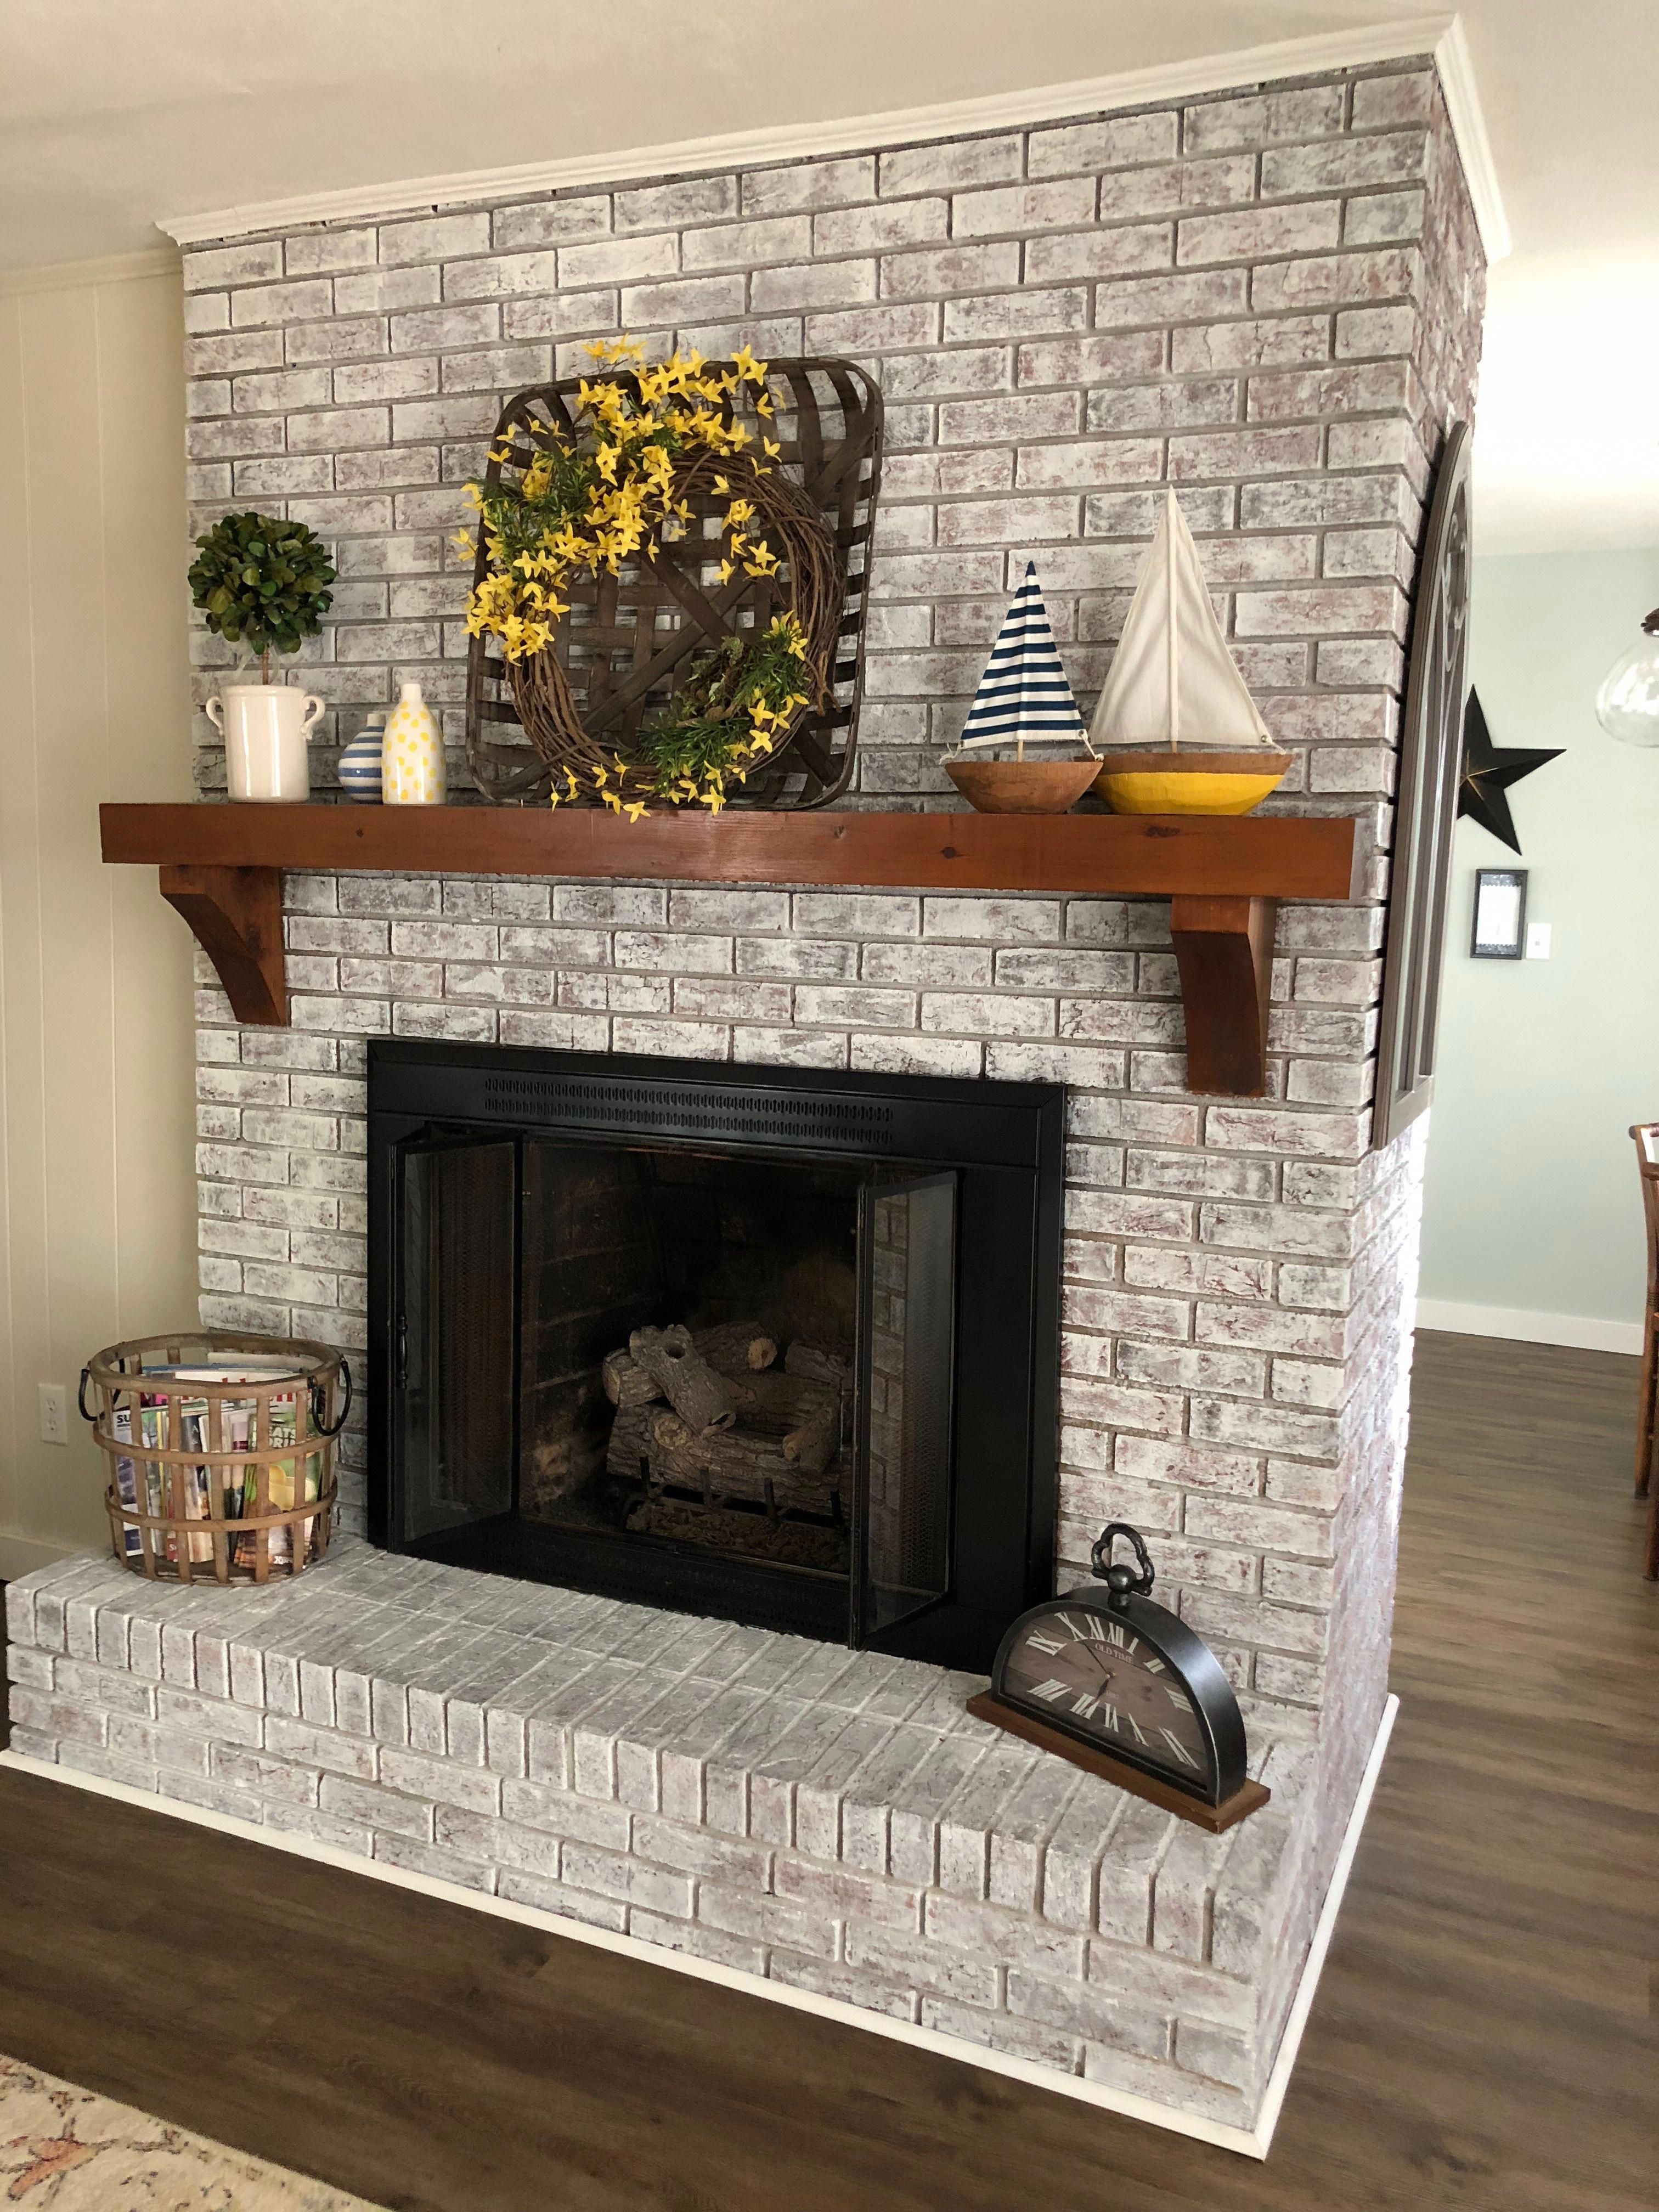 Redo Fireplace Ideas Inspirational Painted Brick Fireplace Sw Pure White Over Dark Red Brick